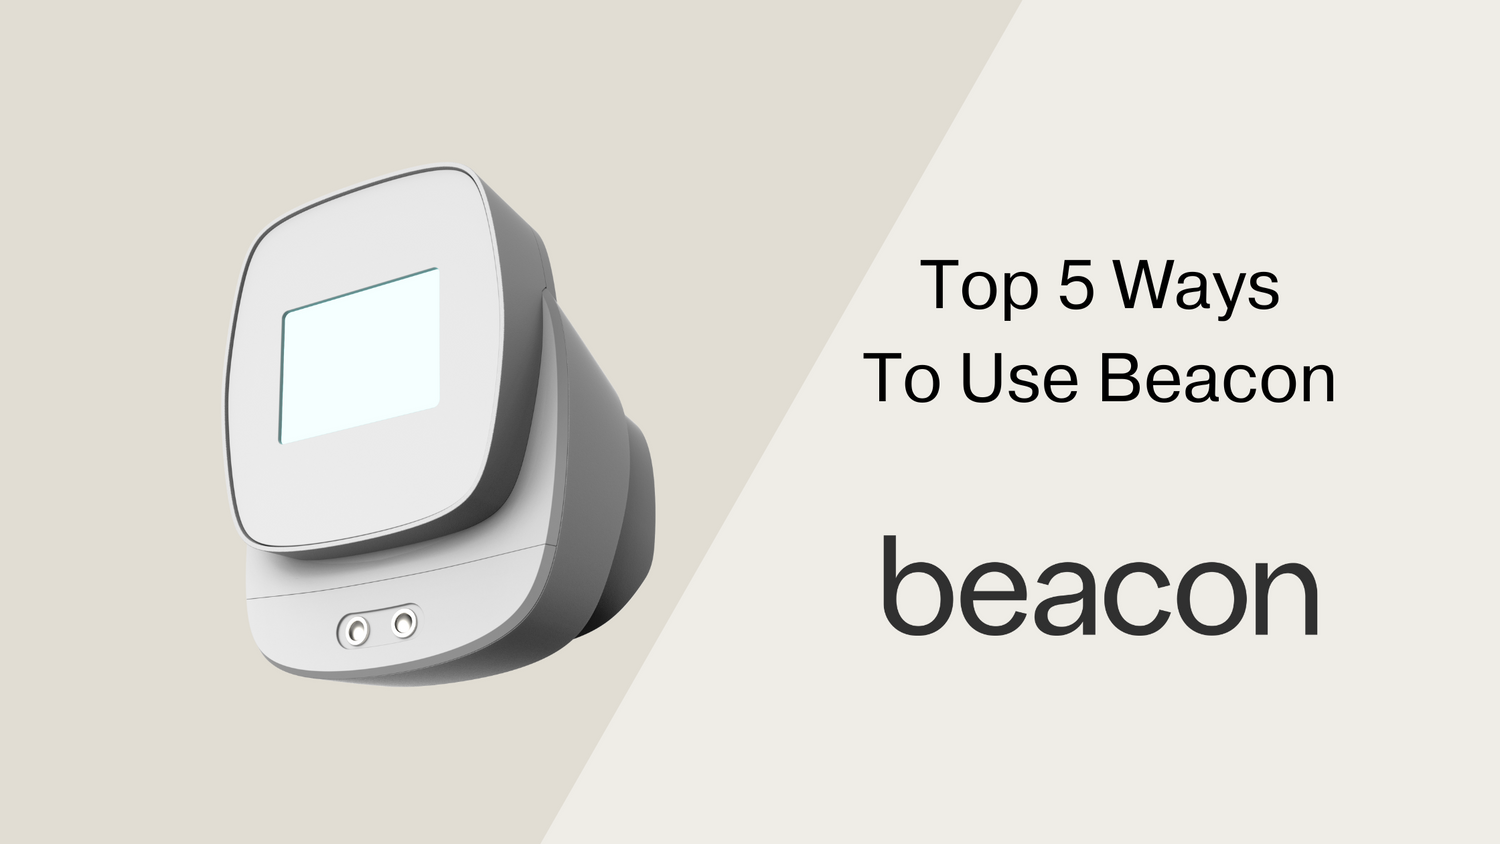 Image of Beacon and Top 5 Ways to Use Beacon